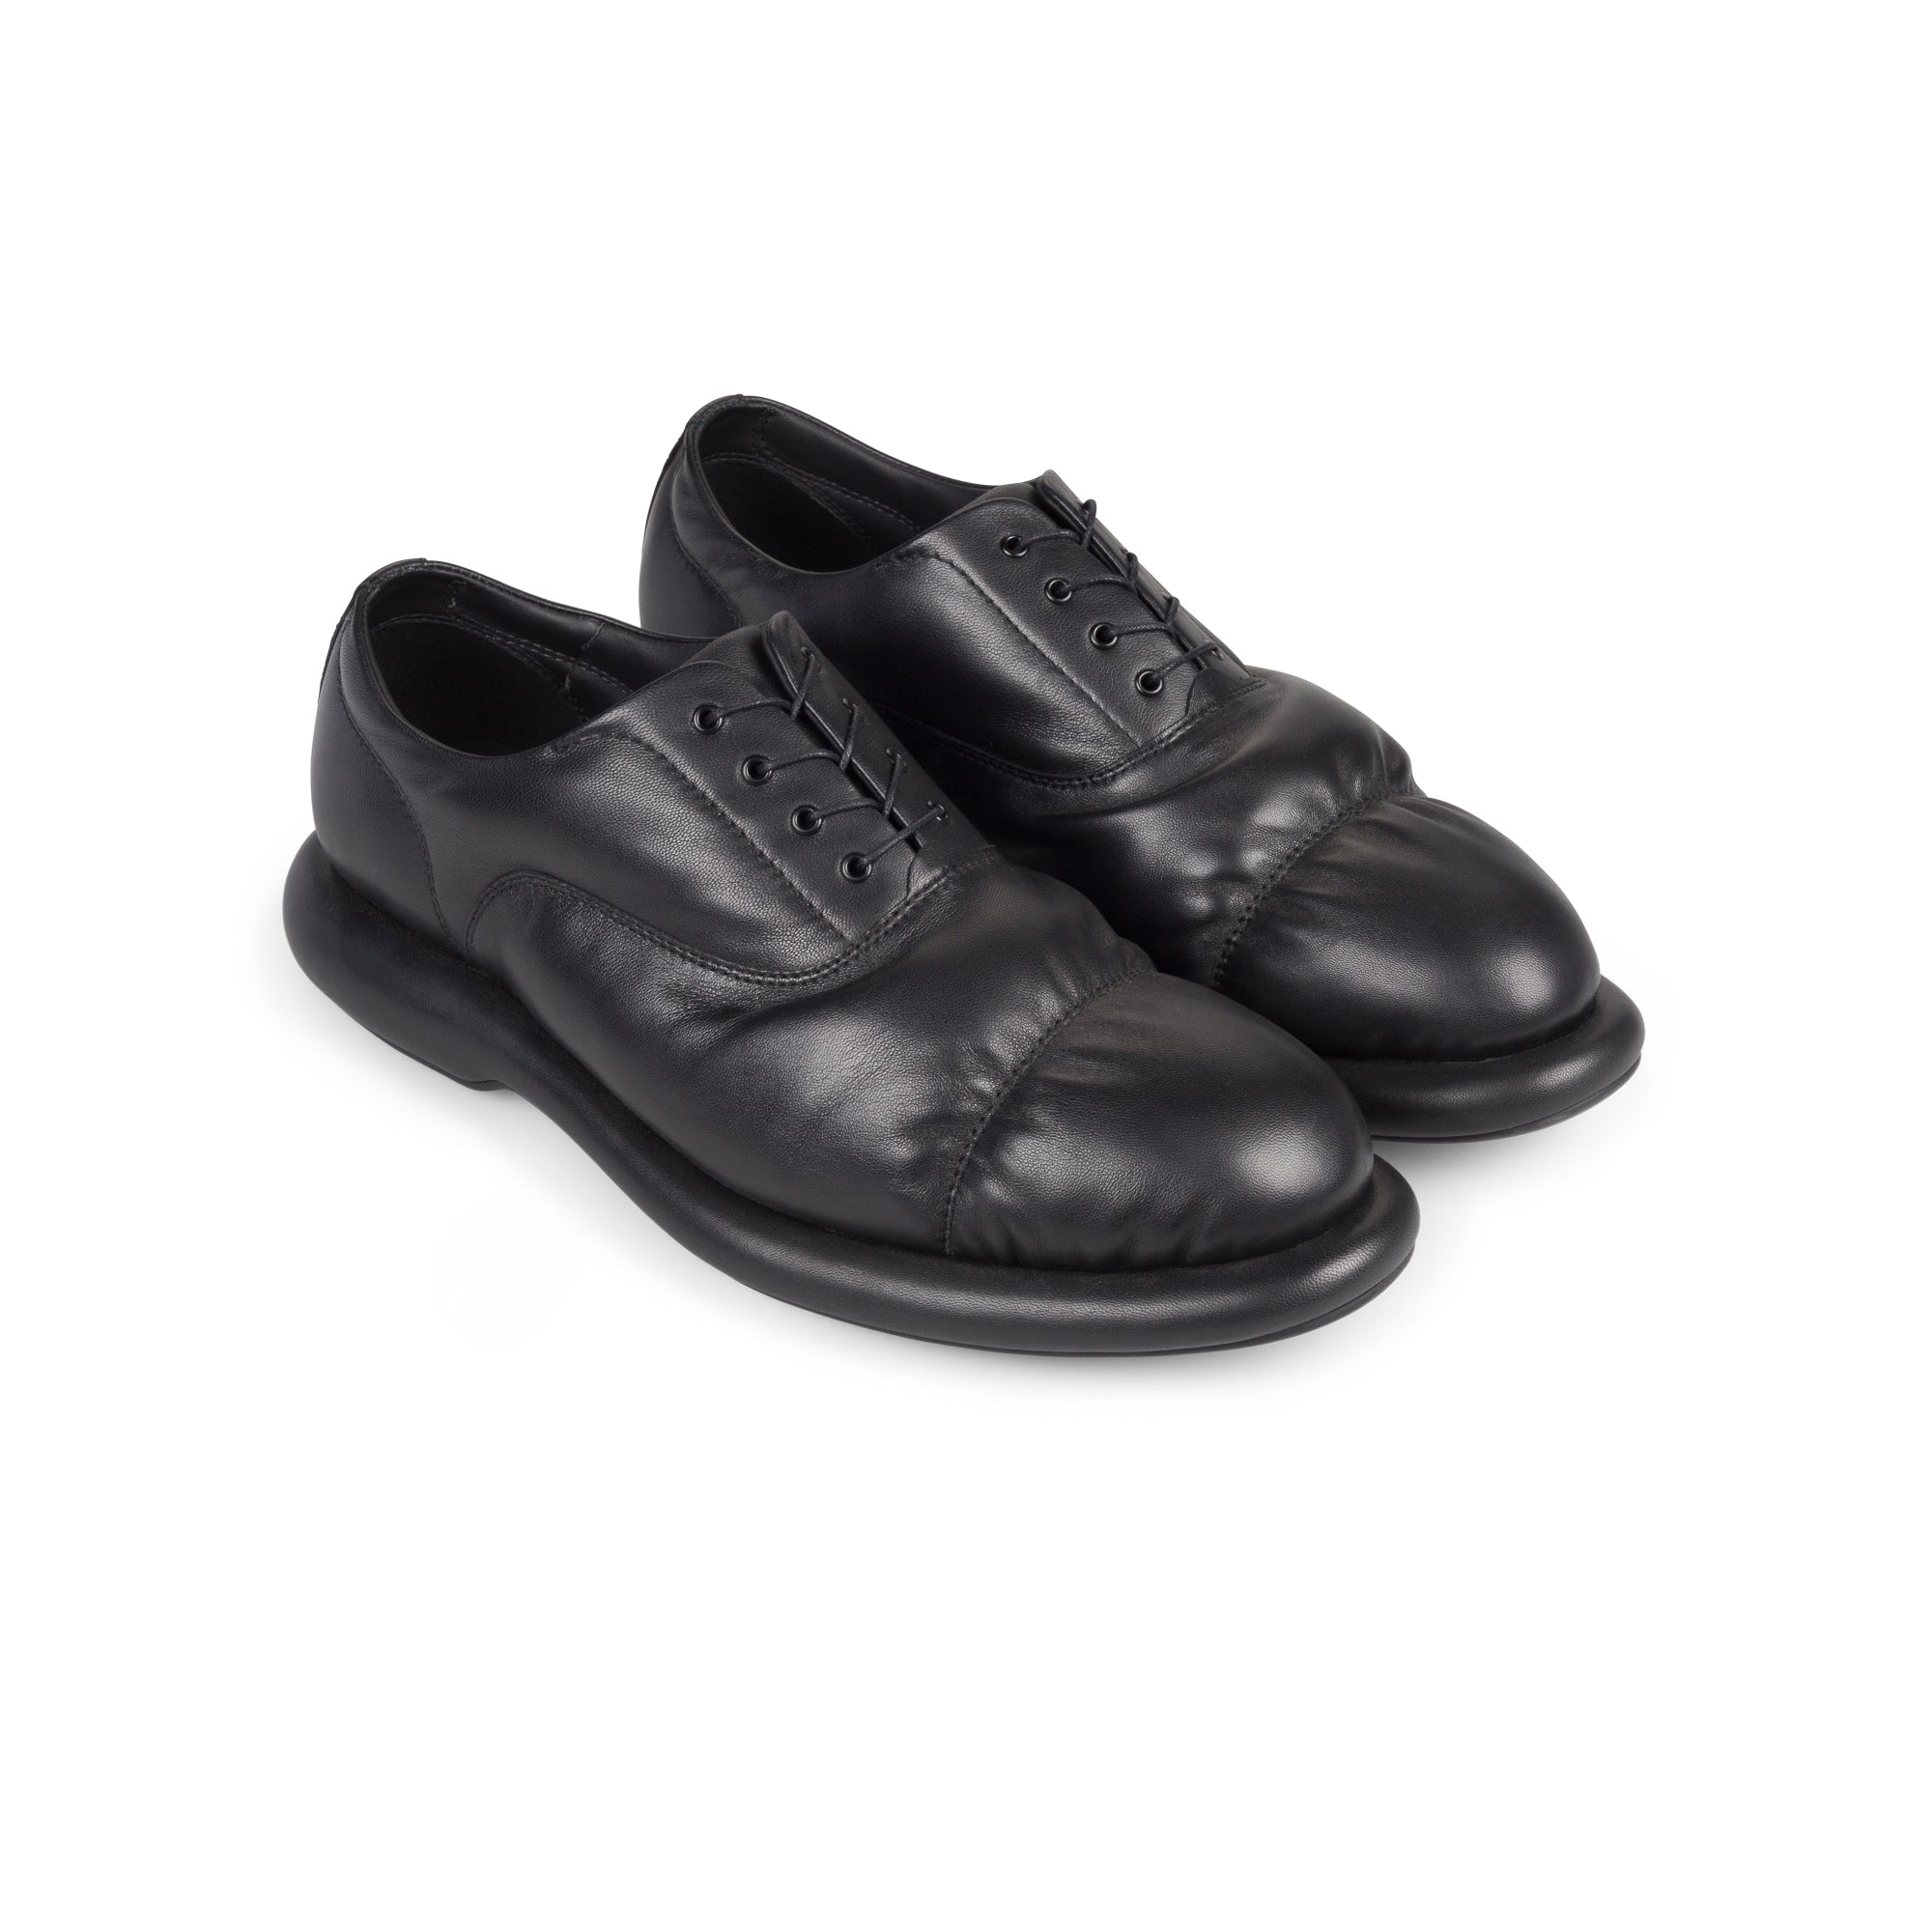 Martine Rose x Clarks Leather Oxford Shoes Black